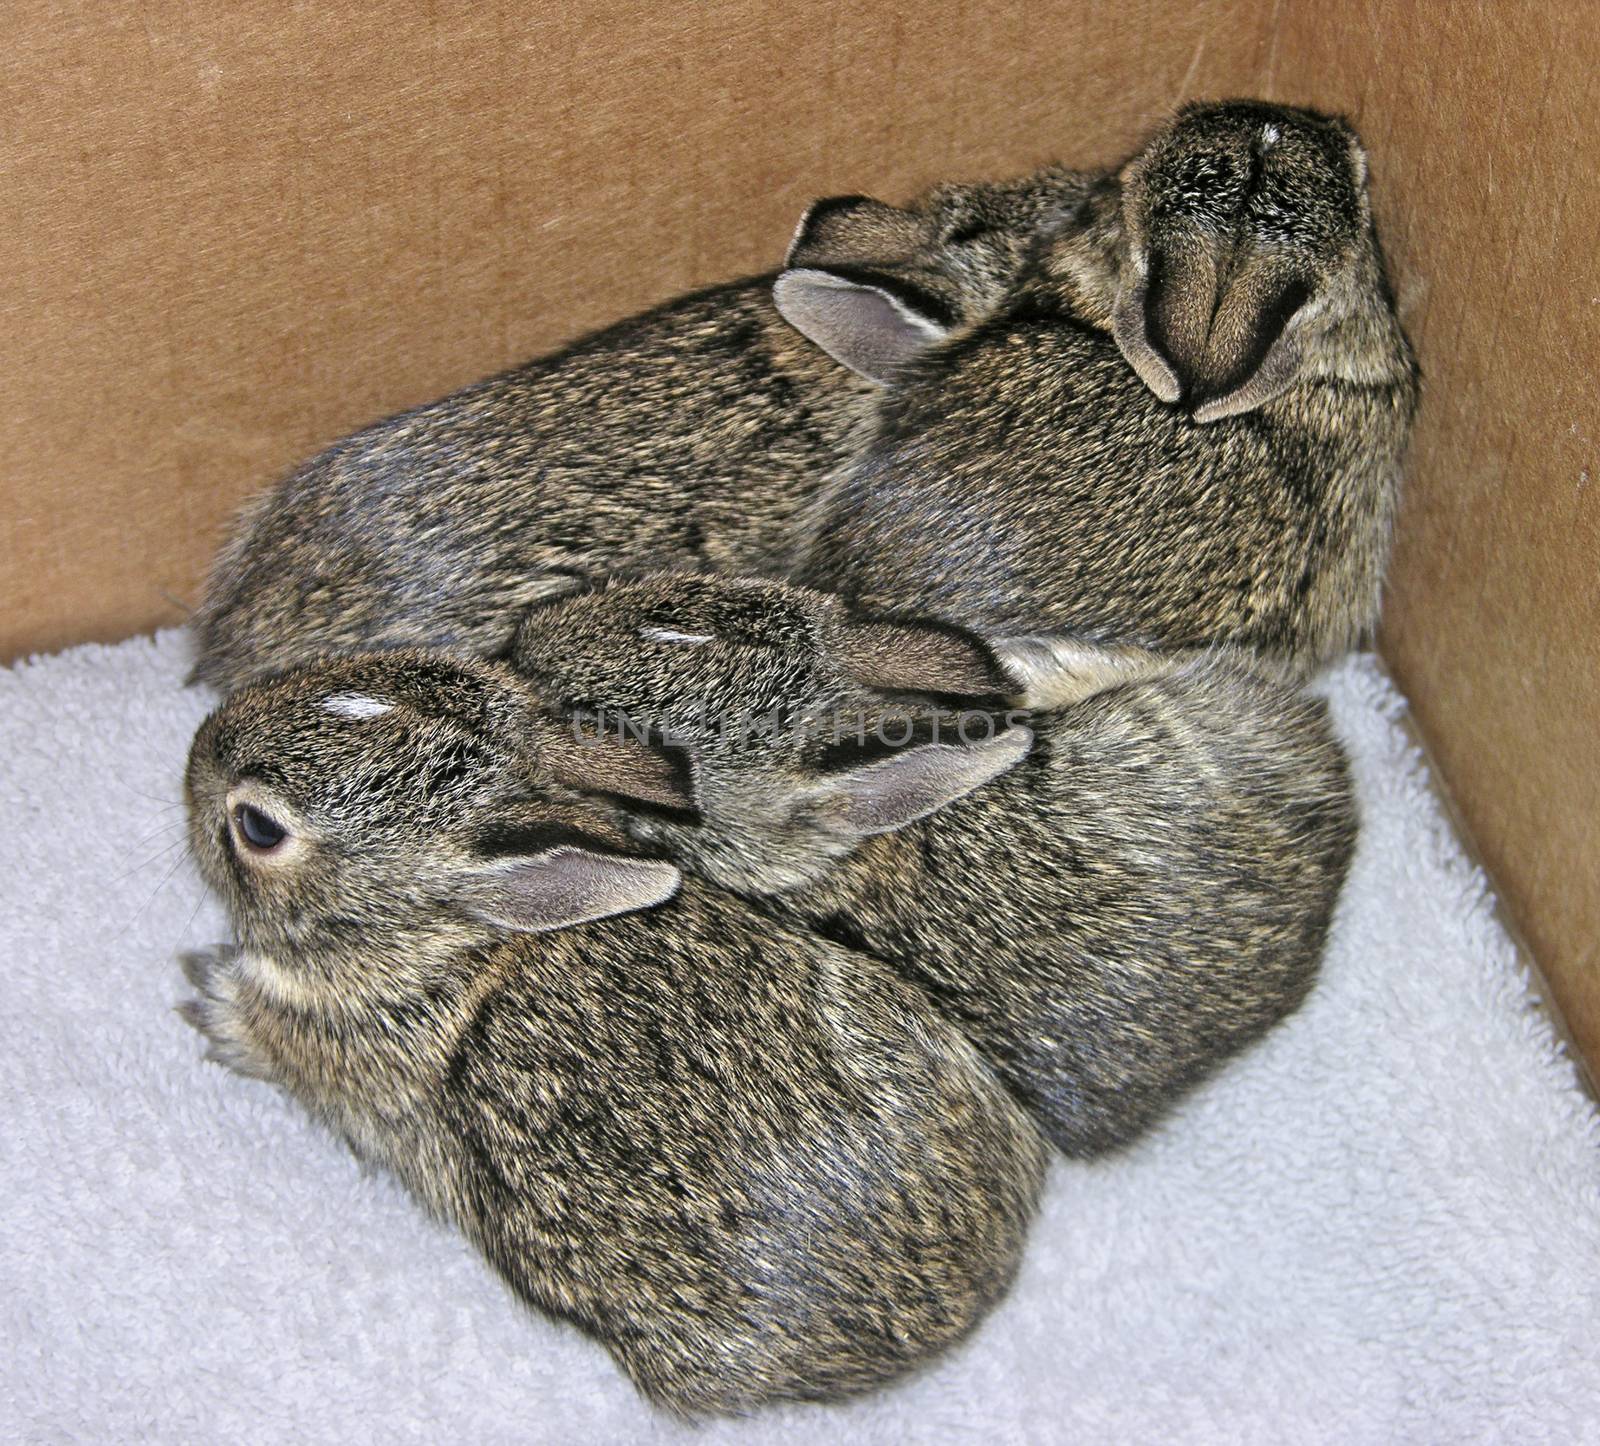 Baby rabbits which were rescued twice from their nest during mowing. They were returned to thier nest each time, and fortunately their mother returned to care for them.